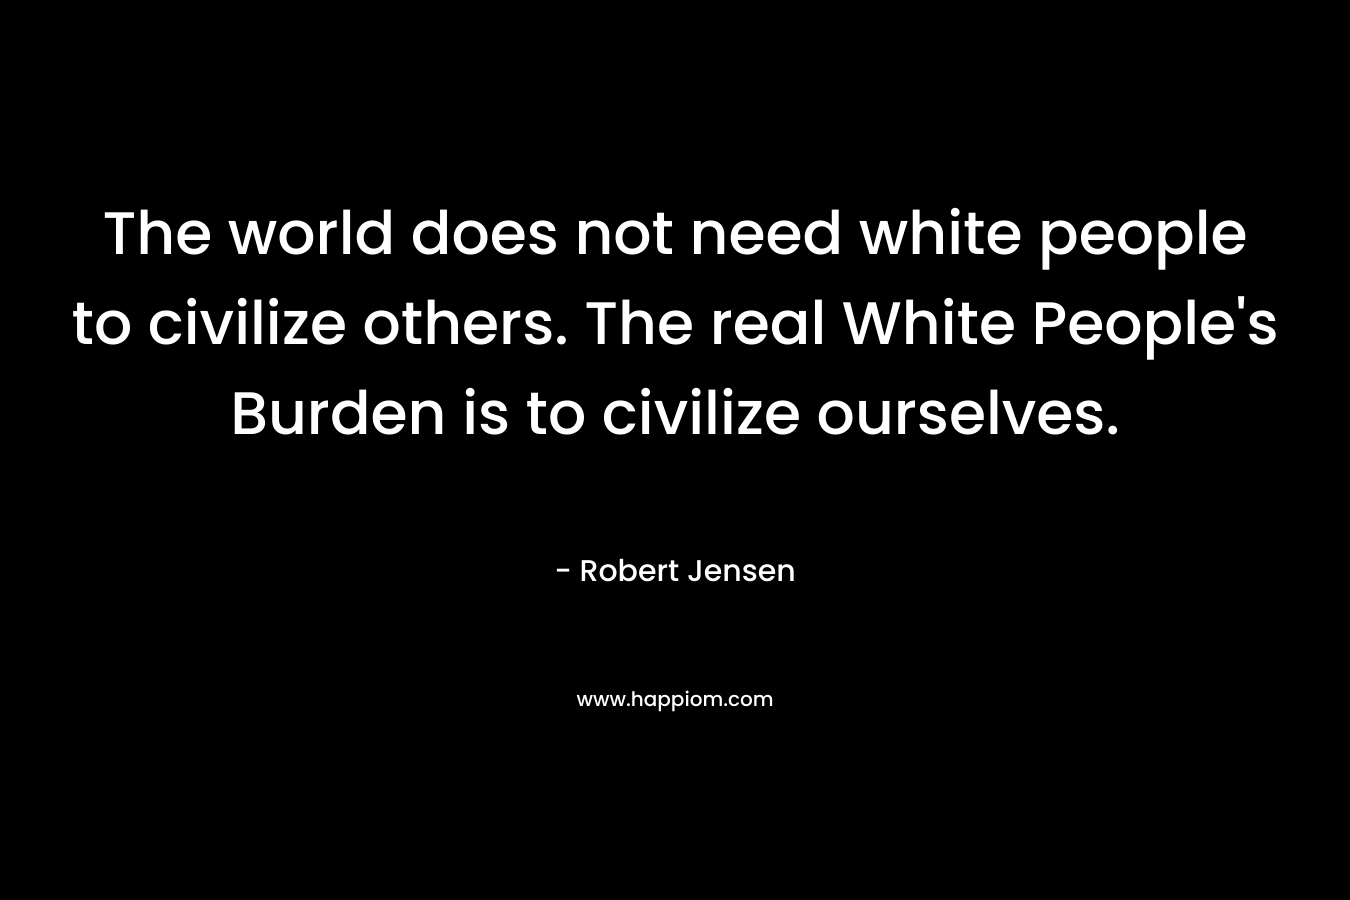 The world does not need white people to civilize others. The real White People's Burden is to civilize ourselves.